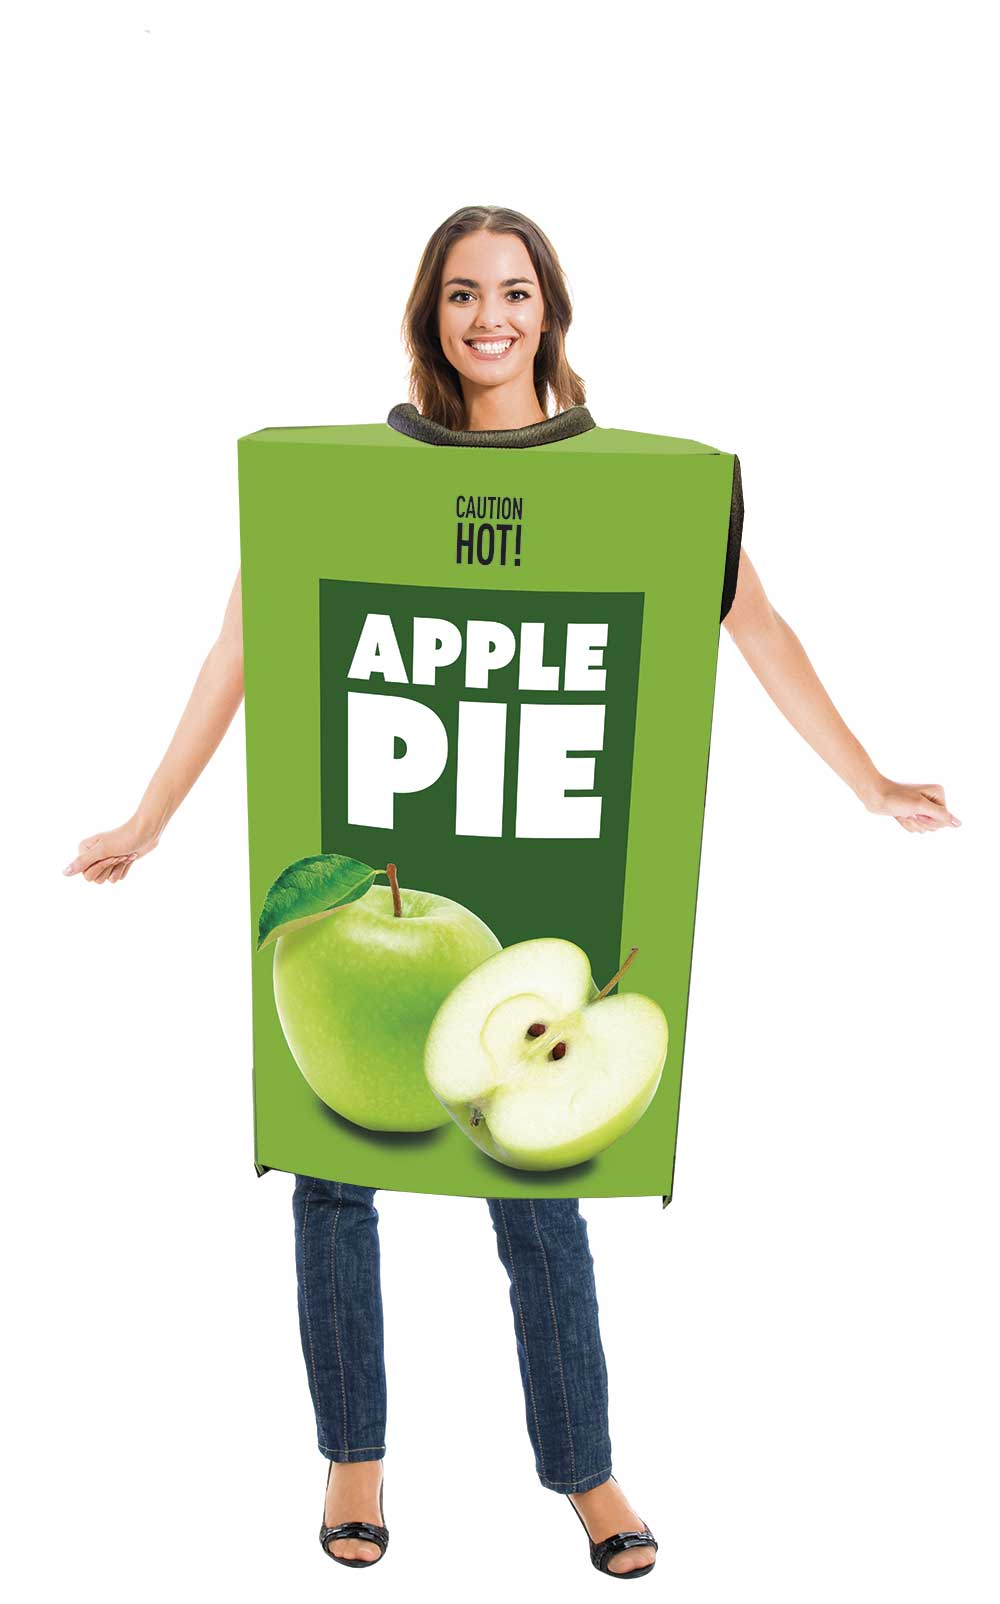 Woman standing in green apple pie costume with green apple photo.